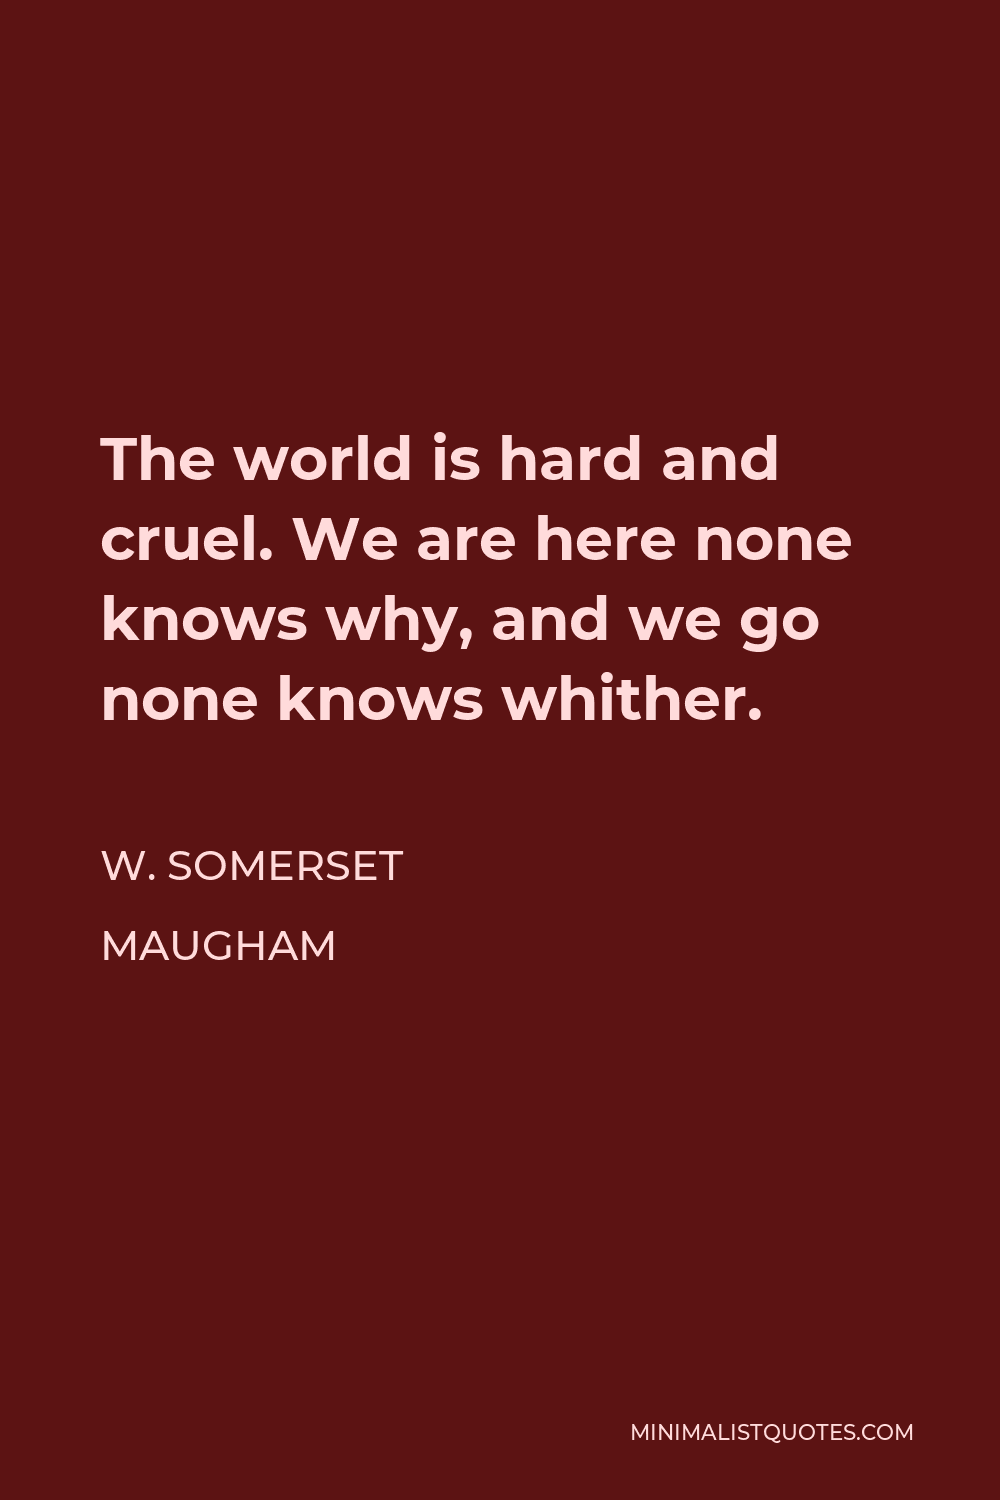 W. Somerset Maugham Quote - The world is hard and cruel. We are here none knows why, and we go none knows whither.